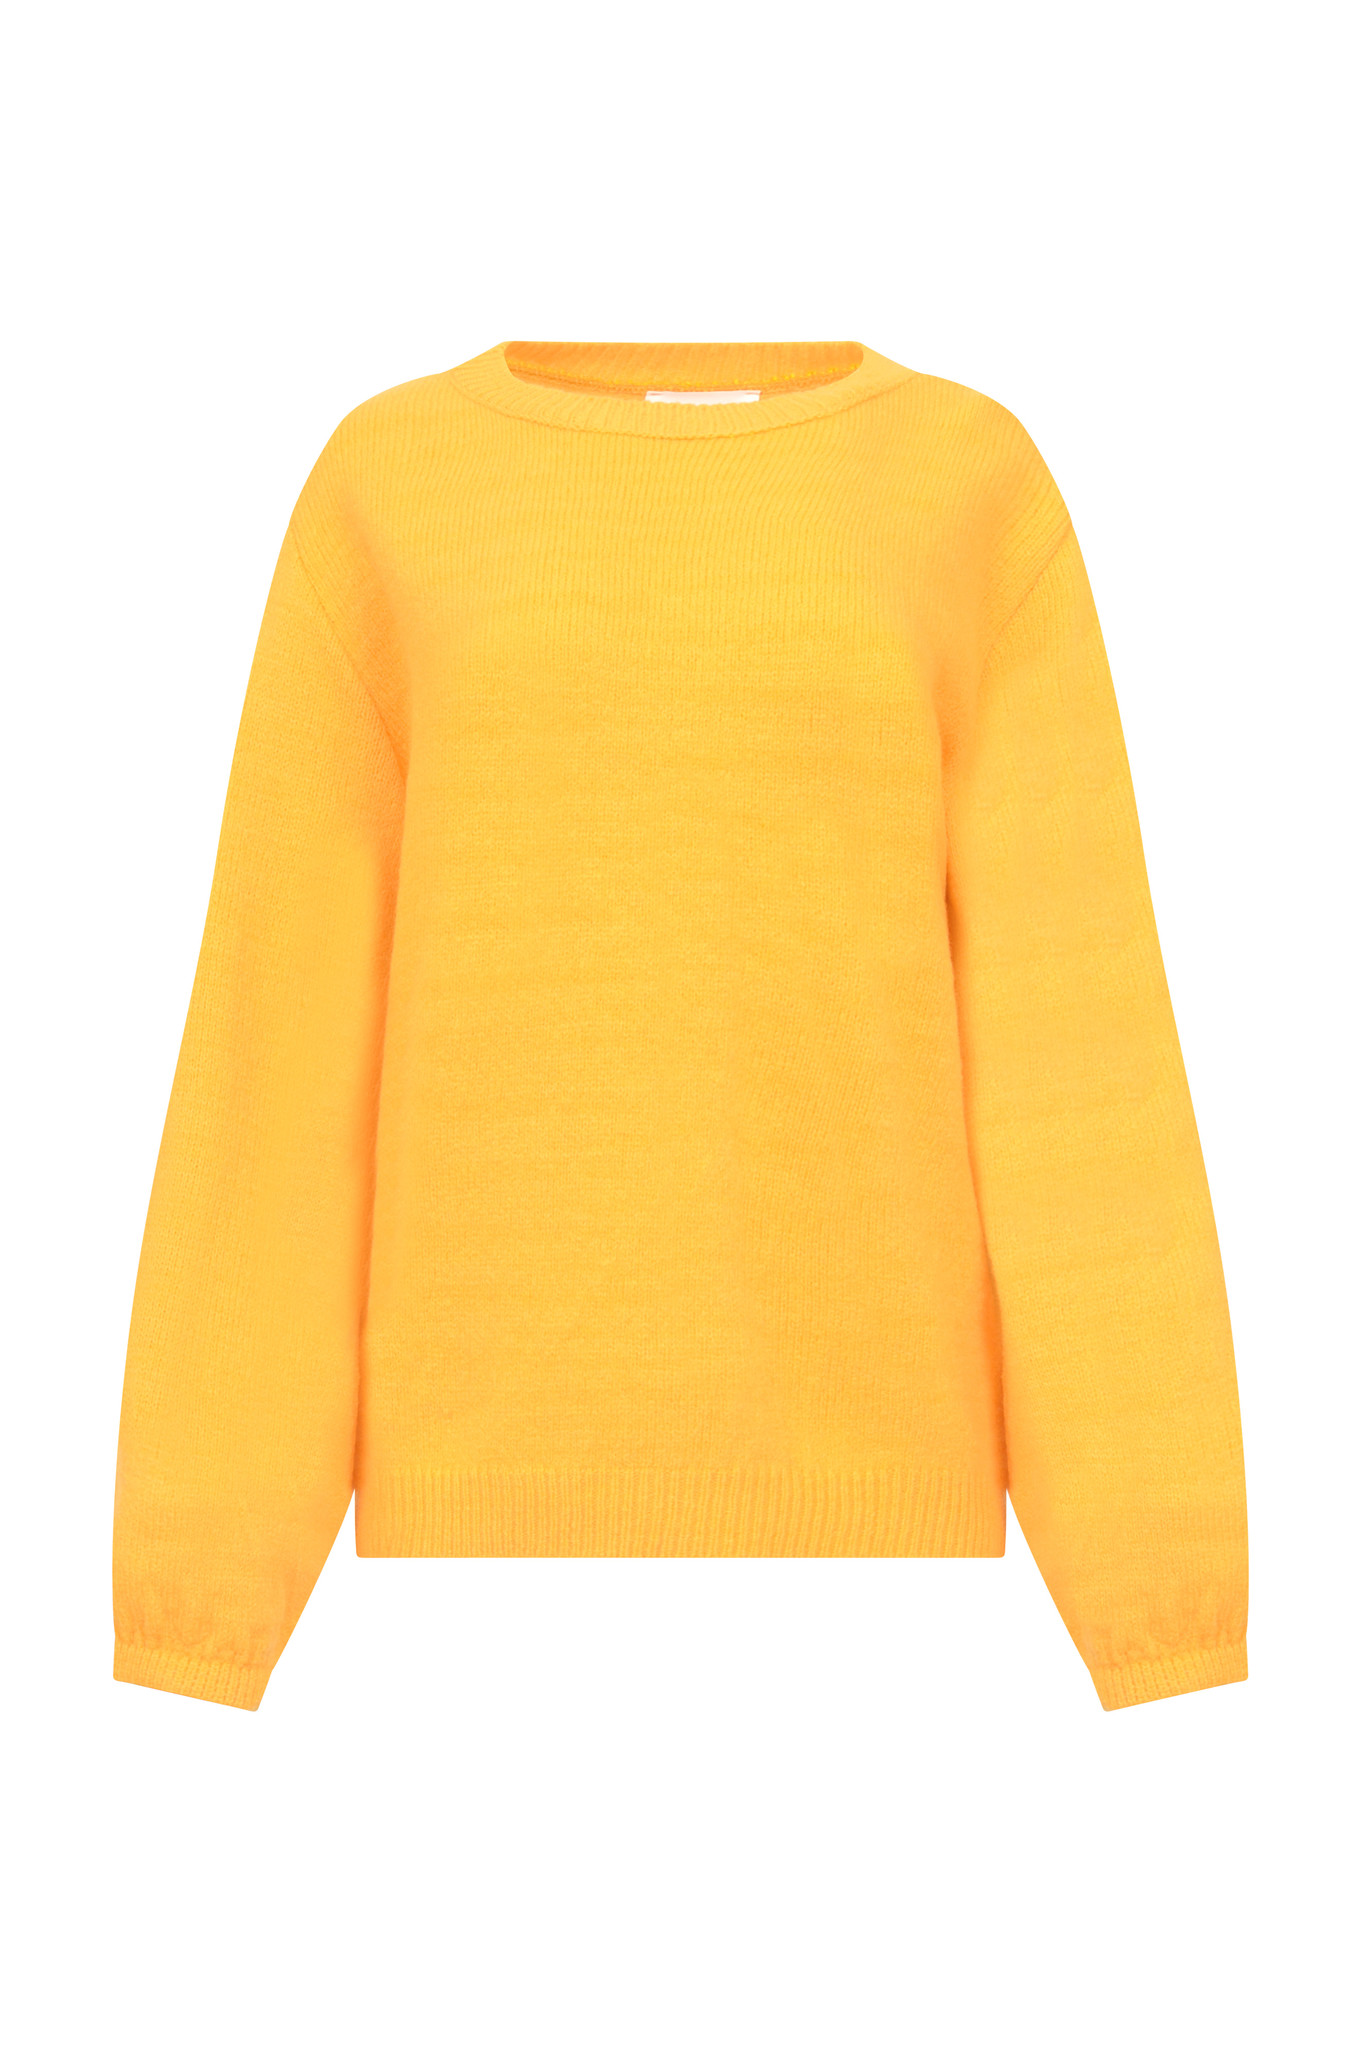 SOPHIE SWEATER IN YELLOW-1